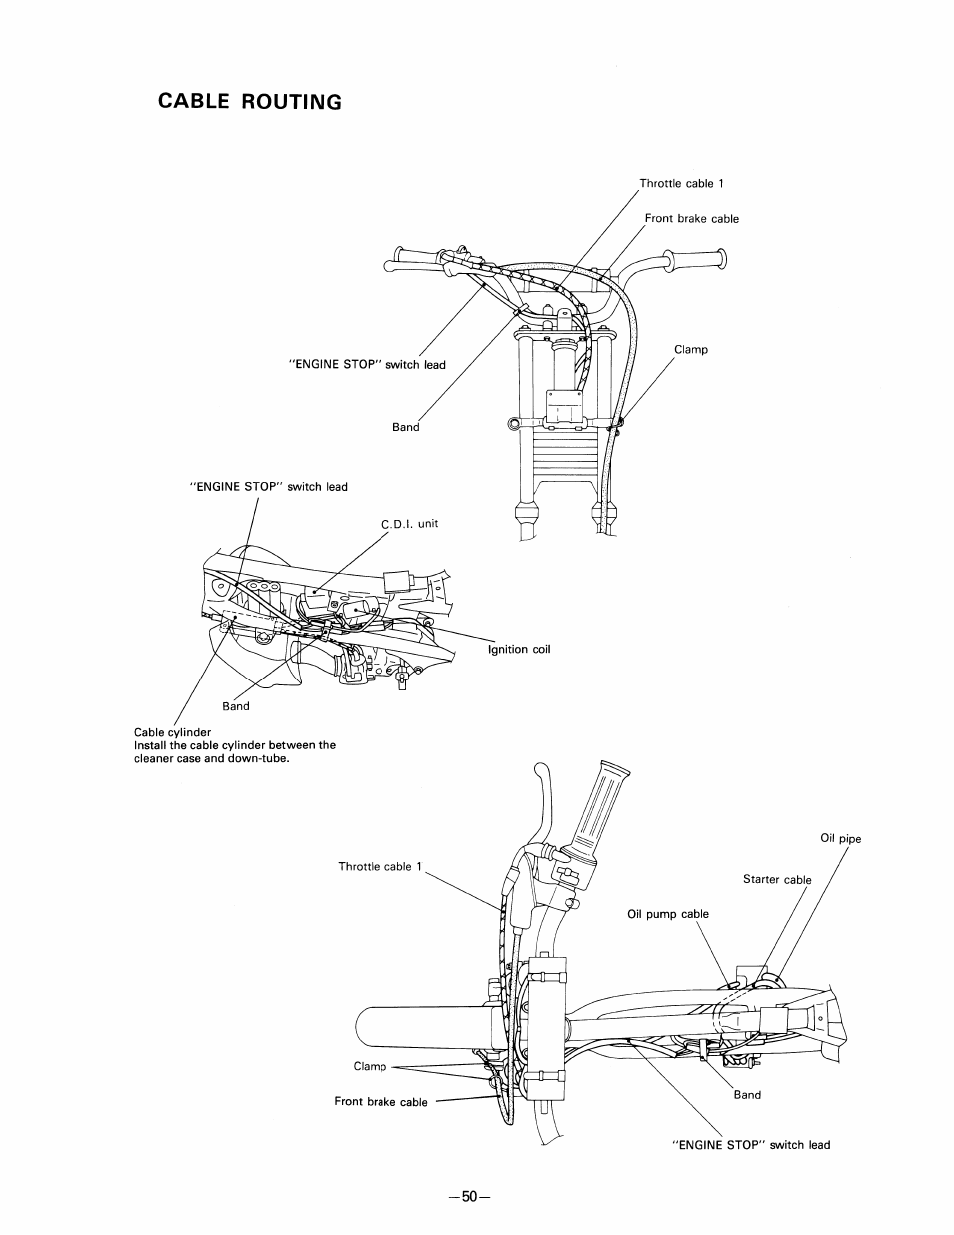 Cable routing | Yamaha pw80 User Manual | Page 62 / 64